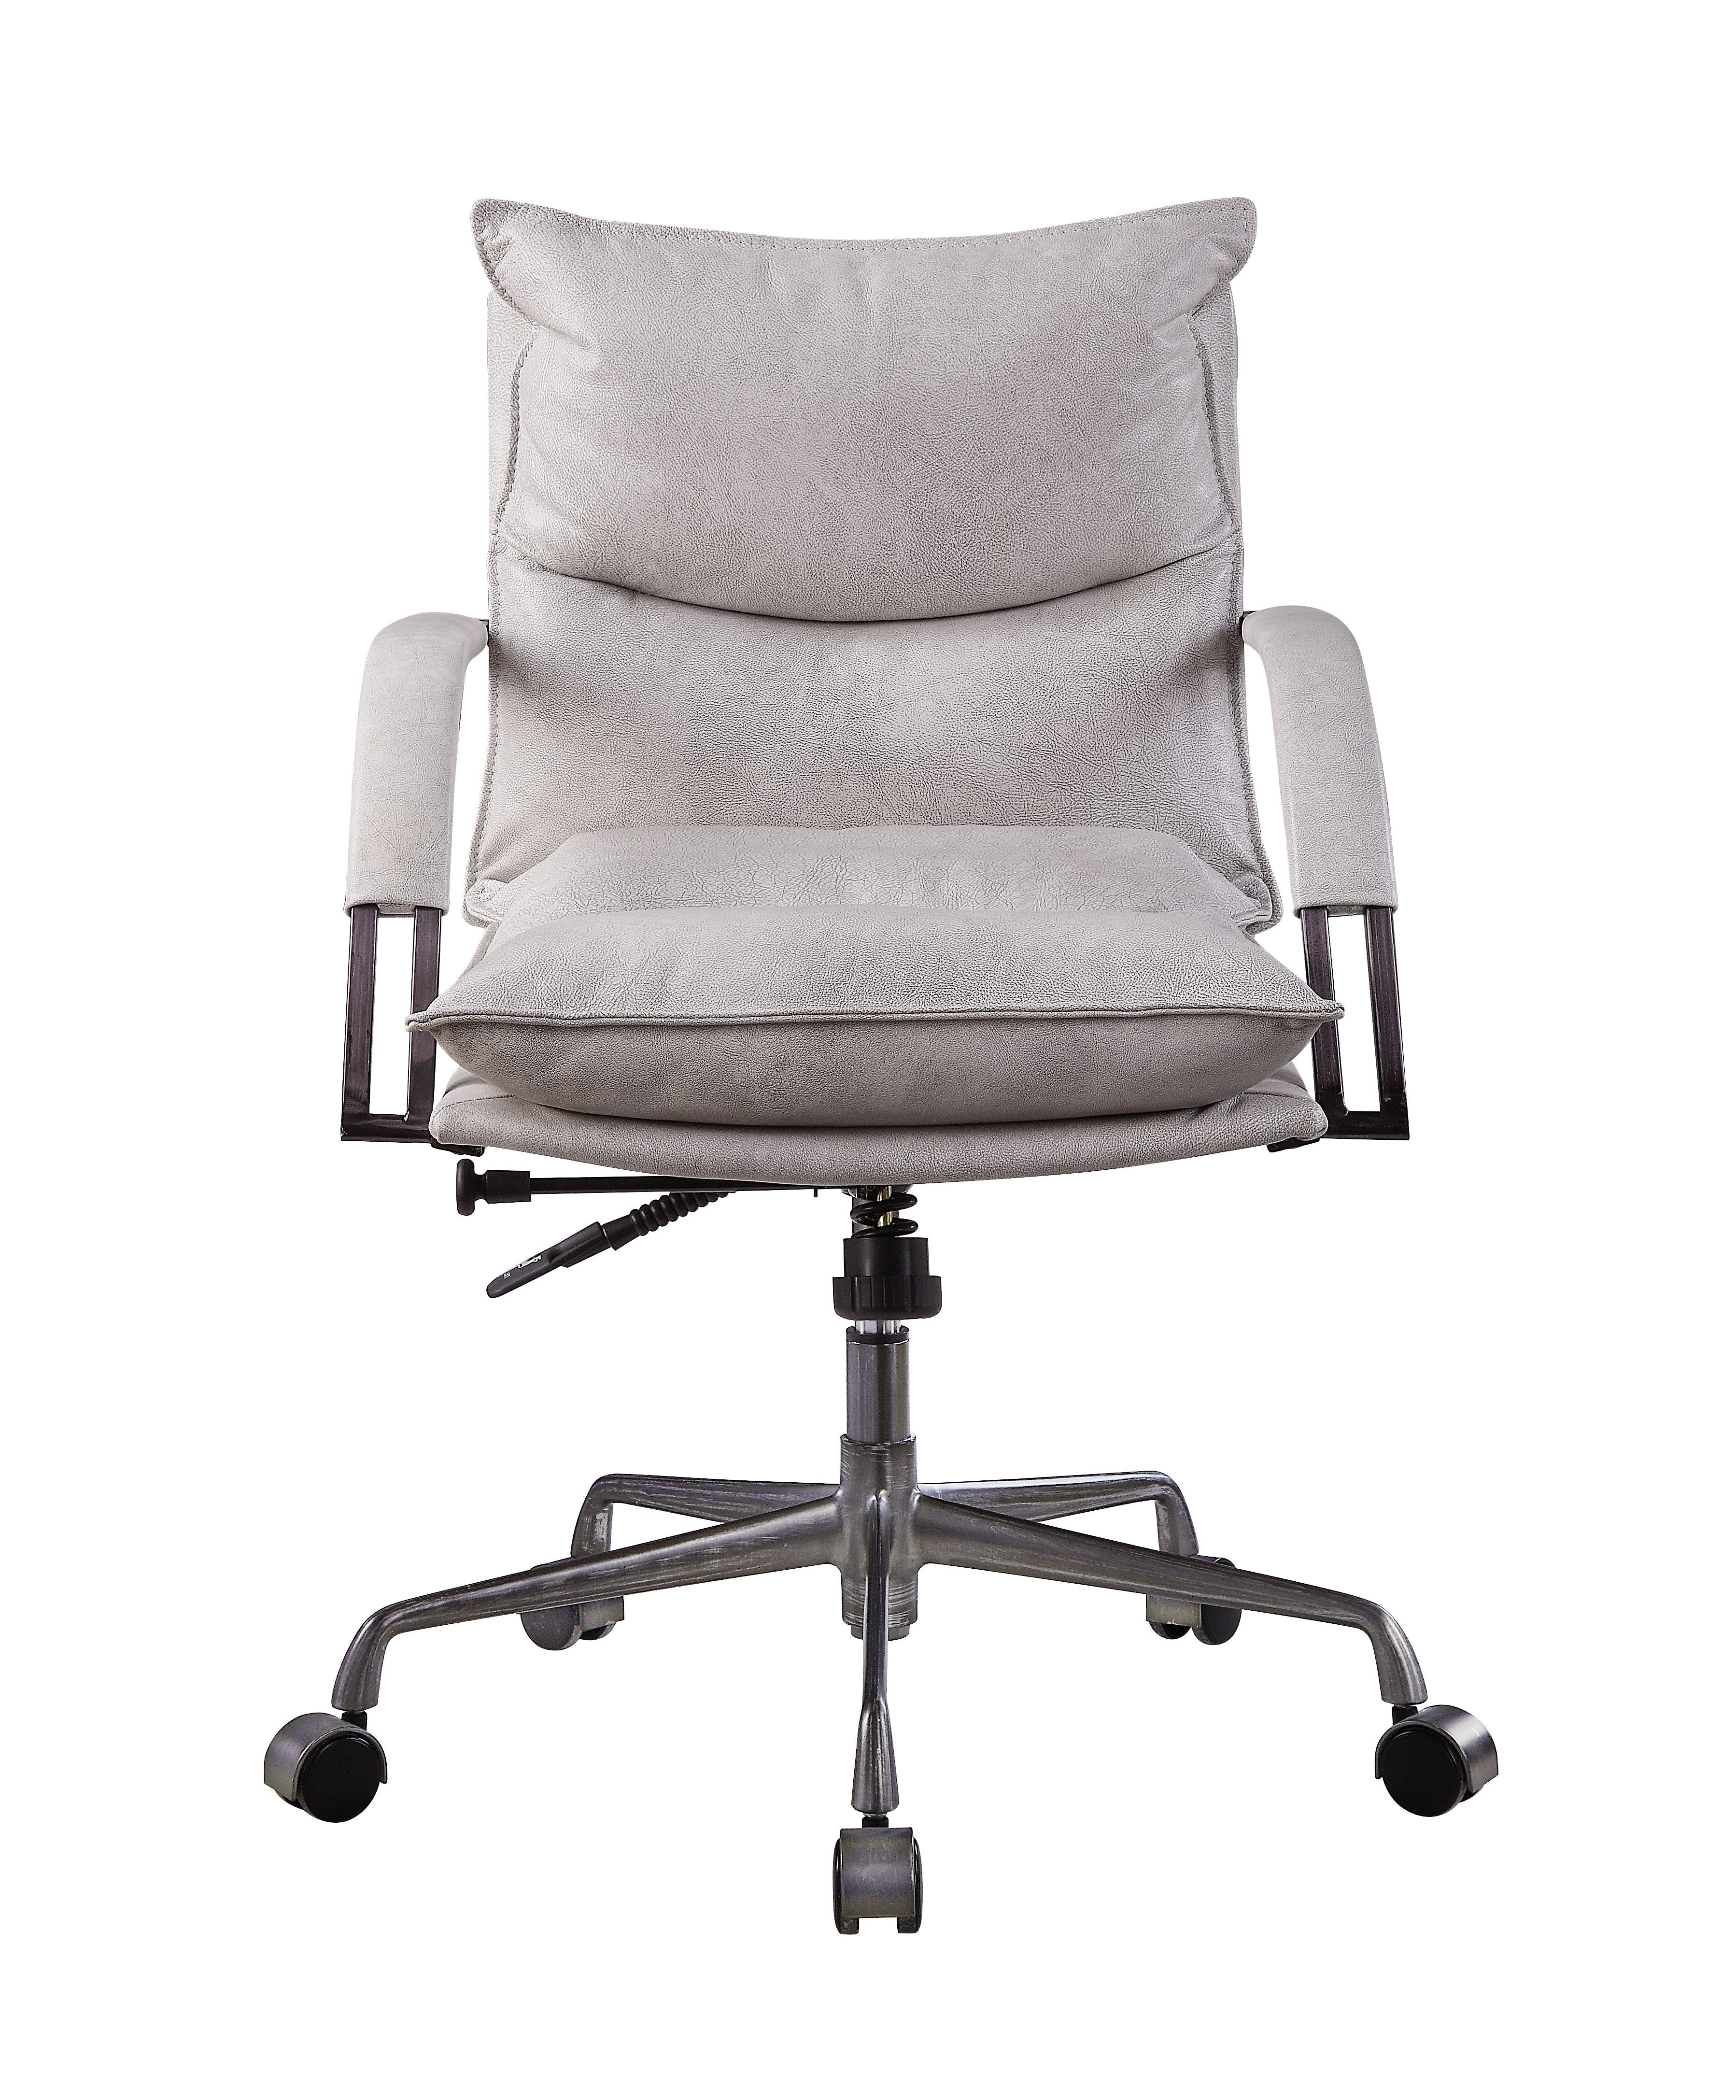 Haggar Vintage White Top Grain Leather Executive Office Chair Model 92537 By ACME Furniture